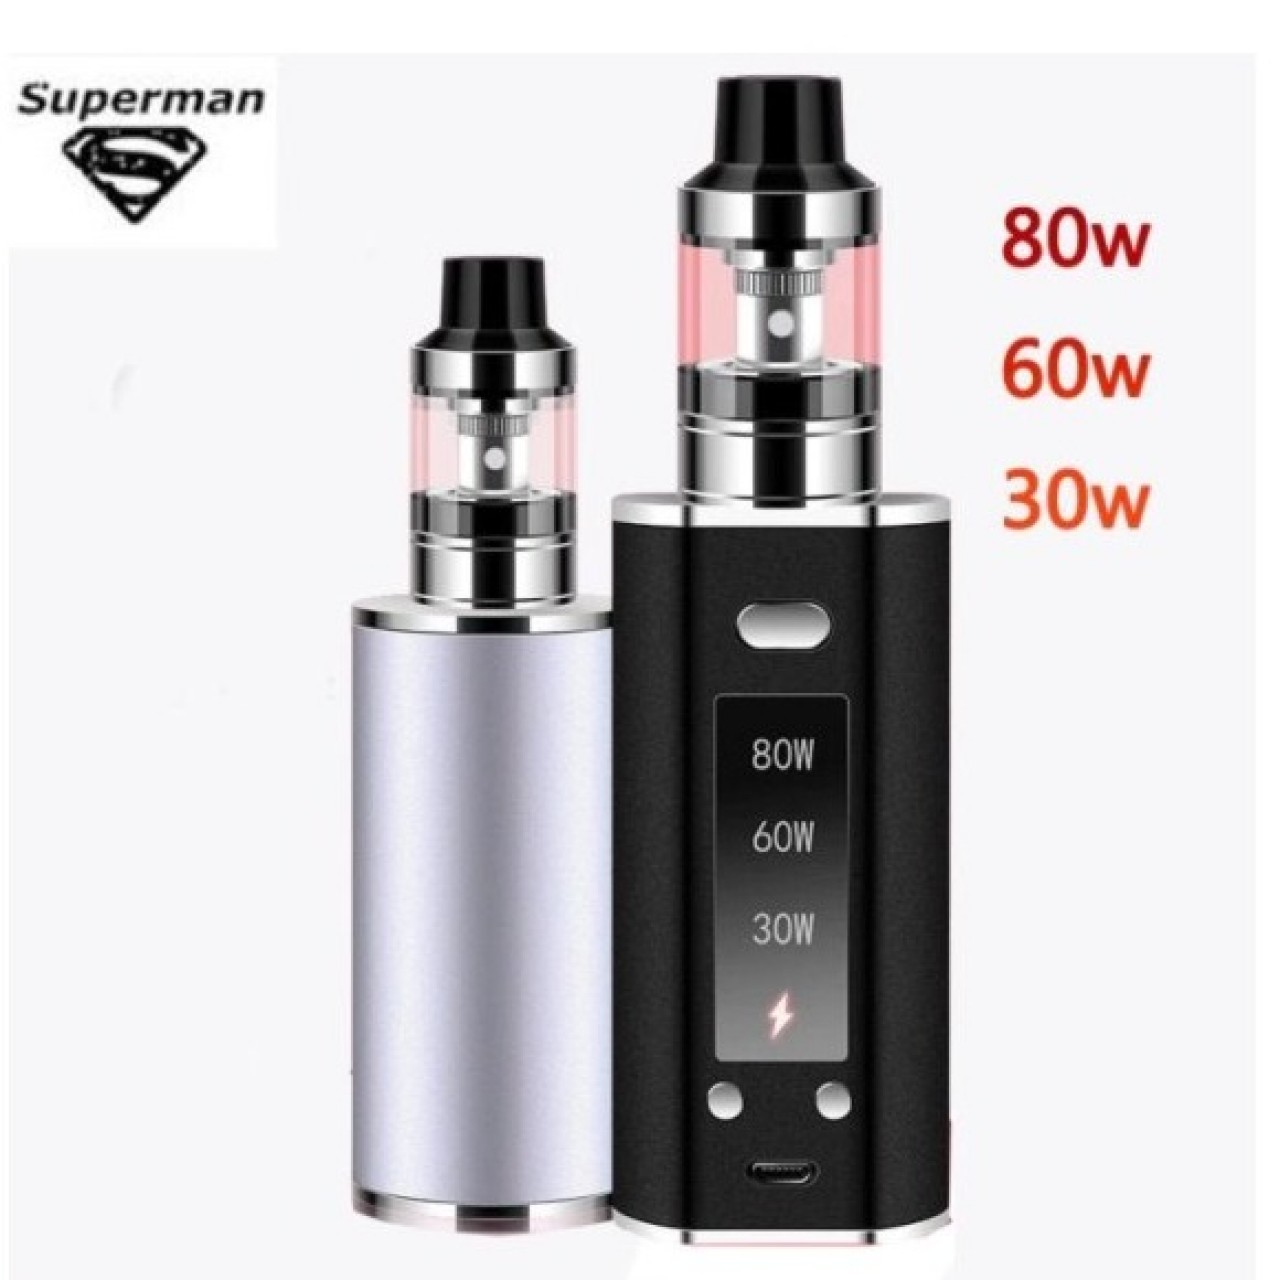 80W High Quality Electronic Cigarette Built-in 2200mAh Battery With LED Display